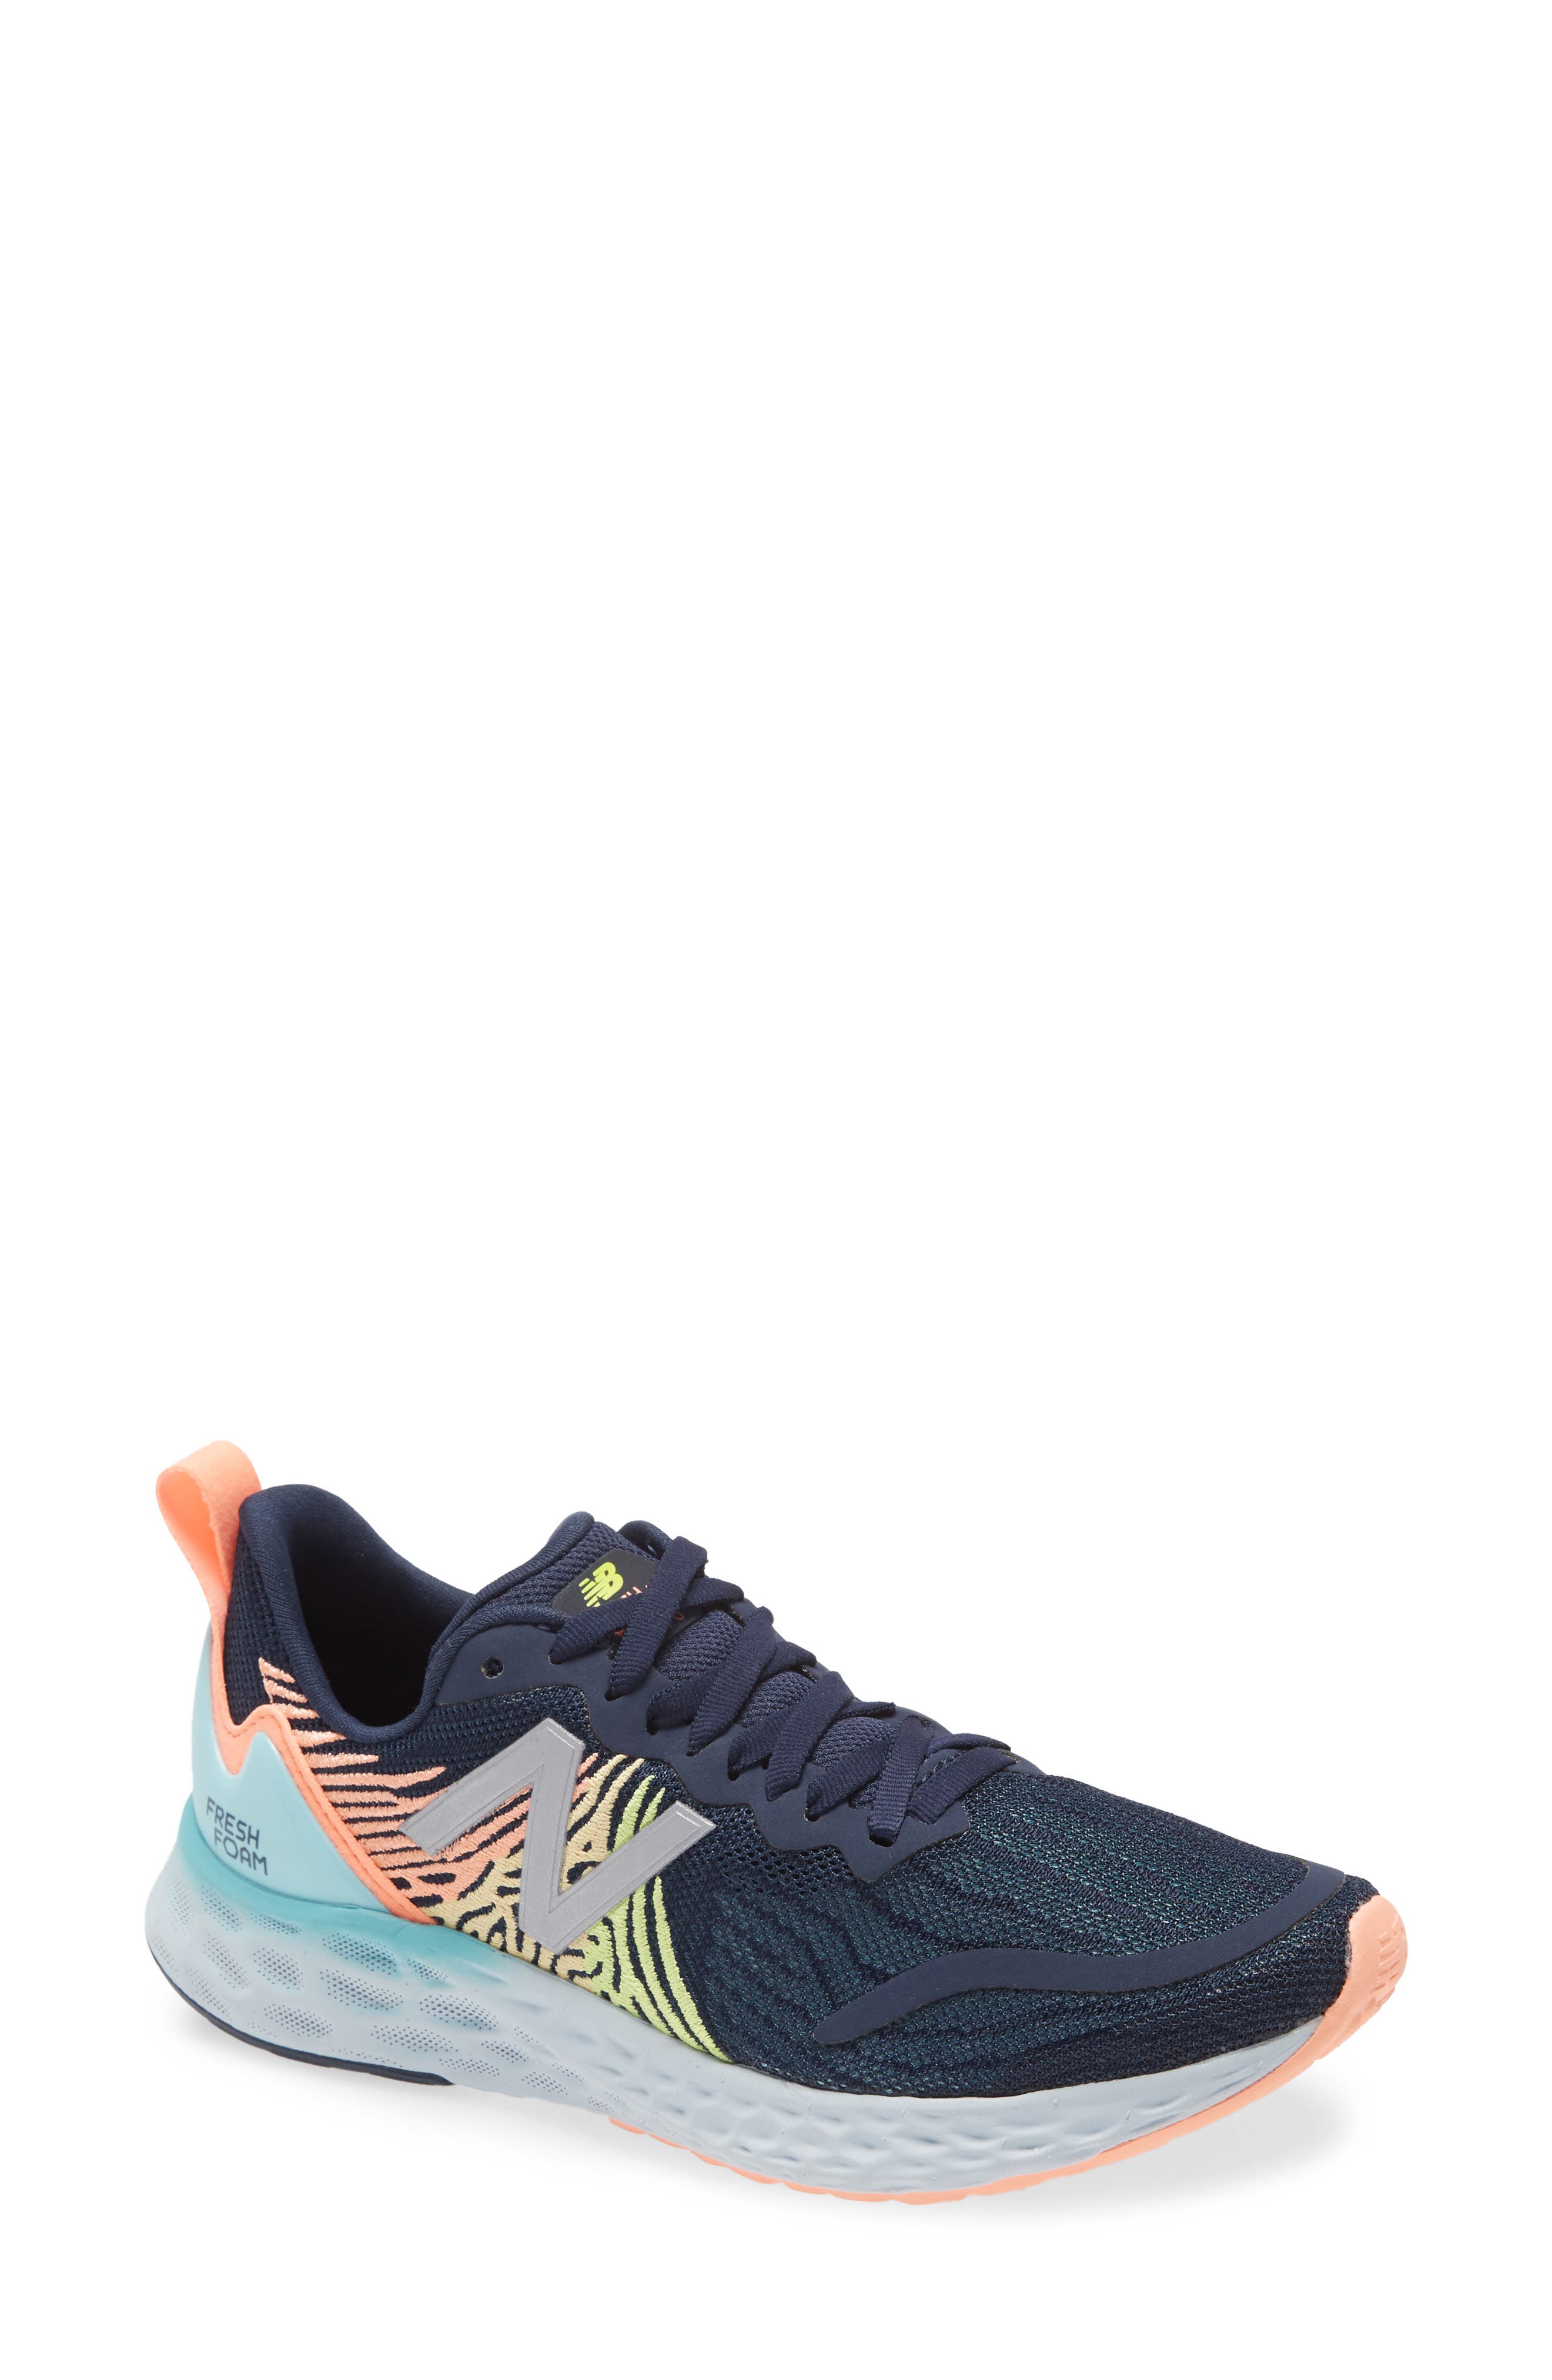 new balance womens shoes nordstrom